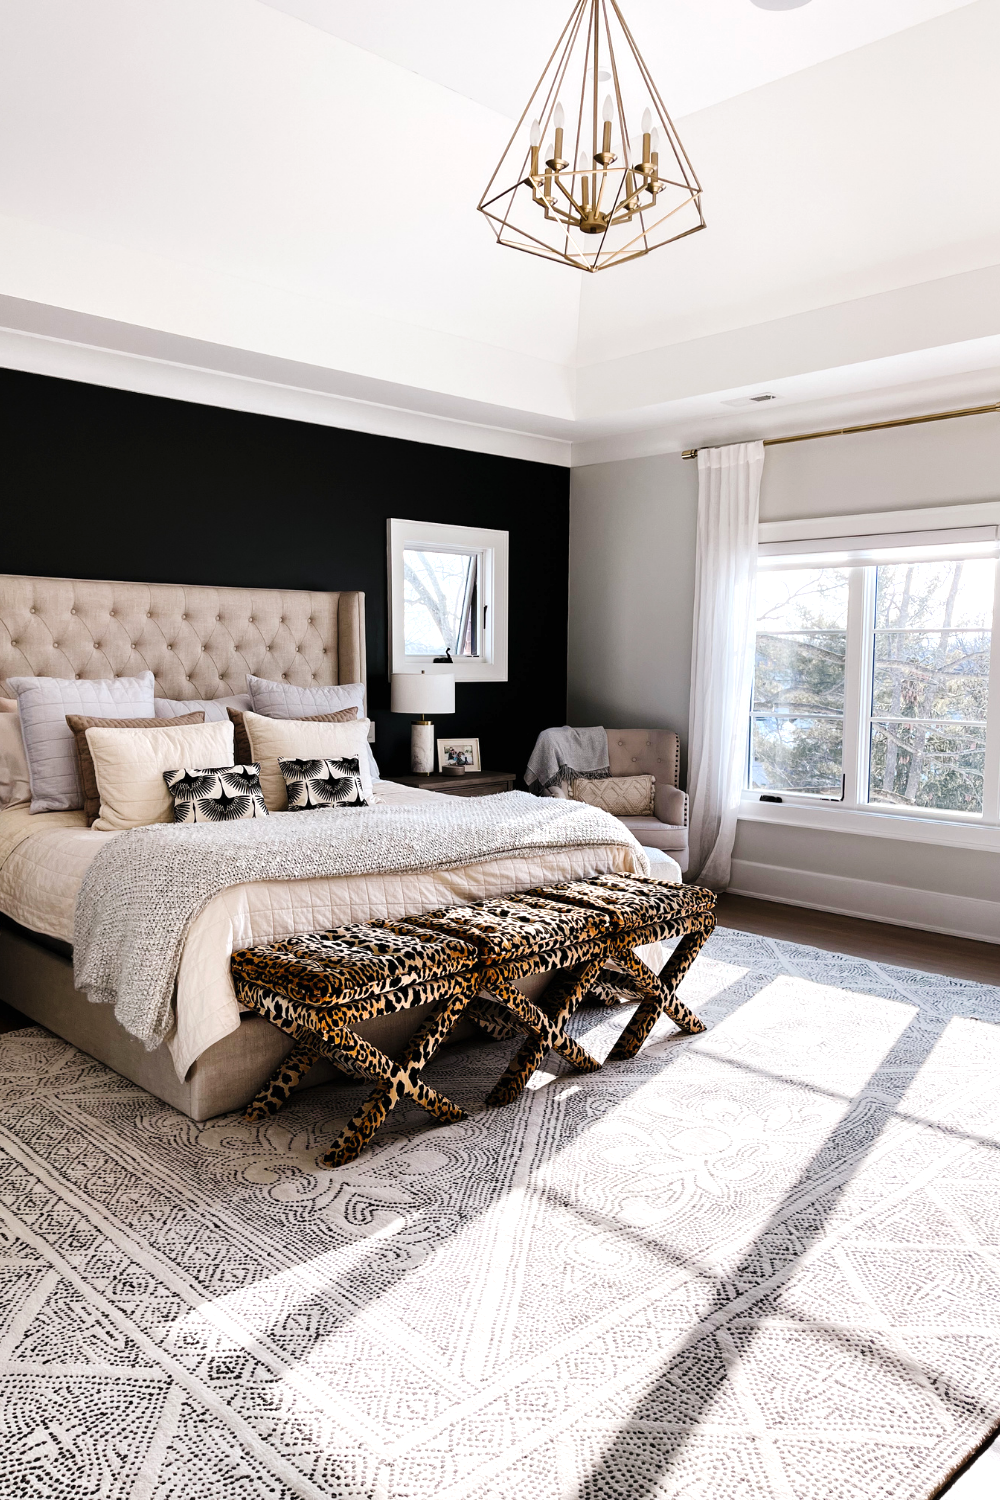 Master bedroom with black accent wall, tufted bed frame, wood side table, printed area rug and reading nook